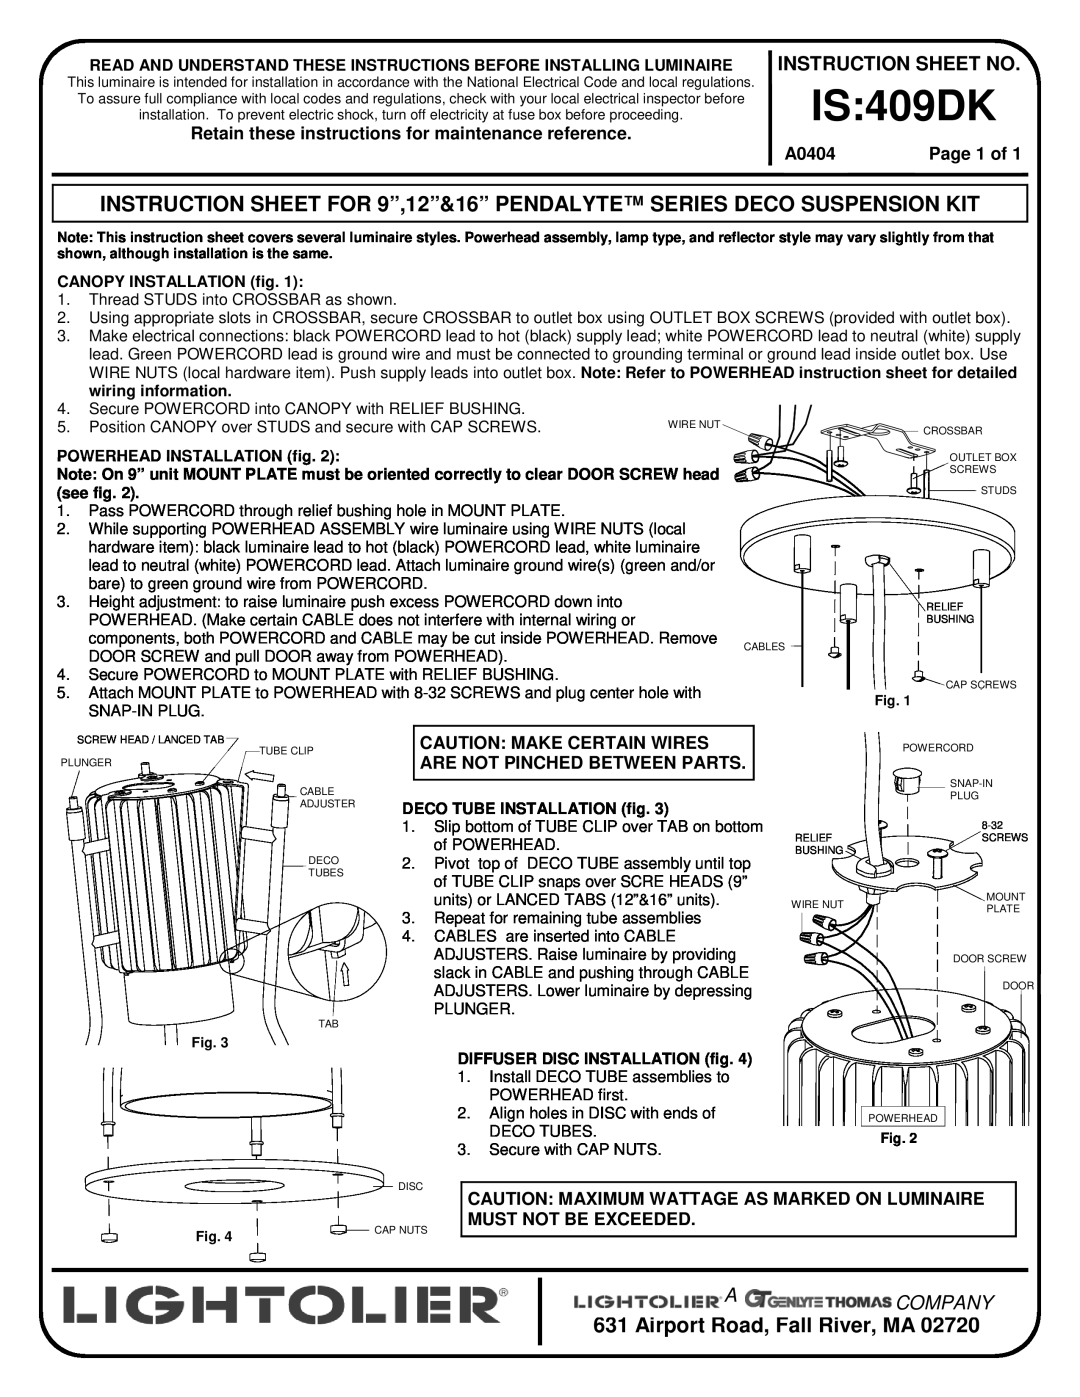 Lightolier IS:409DK instruction sheet Wire Nut Cables Screw Head / Lanced Tab Tube Clip, Disc, Cap Nuts, Cap Screws 